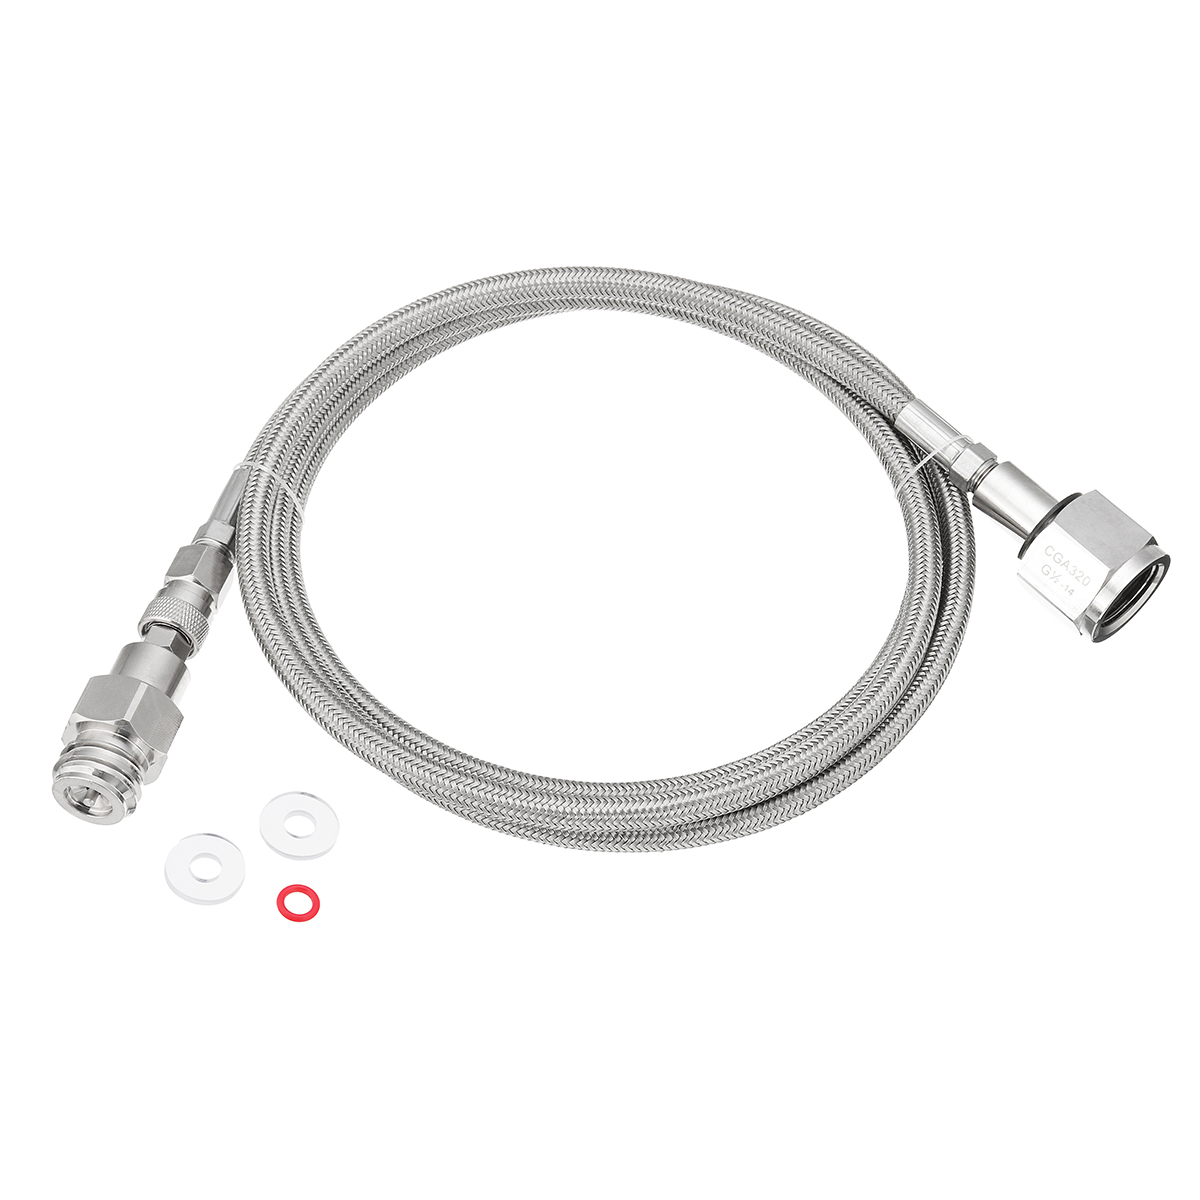 

CO2 SodaStream Soda Club To External CGA320 Tank Direct Adapter And Hose Kit 72 Inch Braided Hose